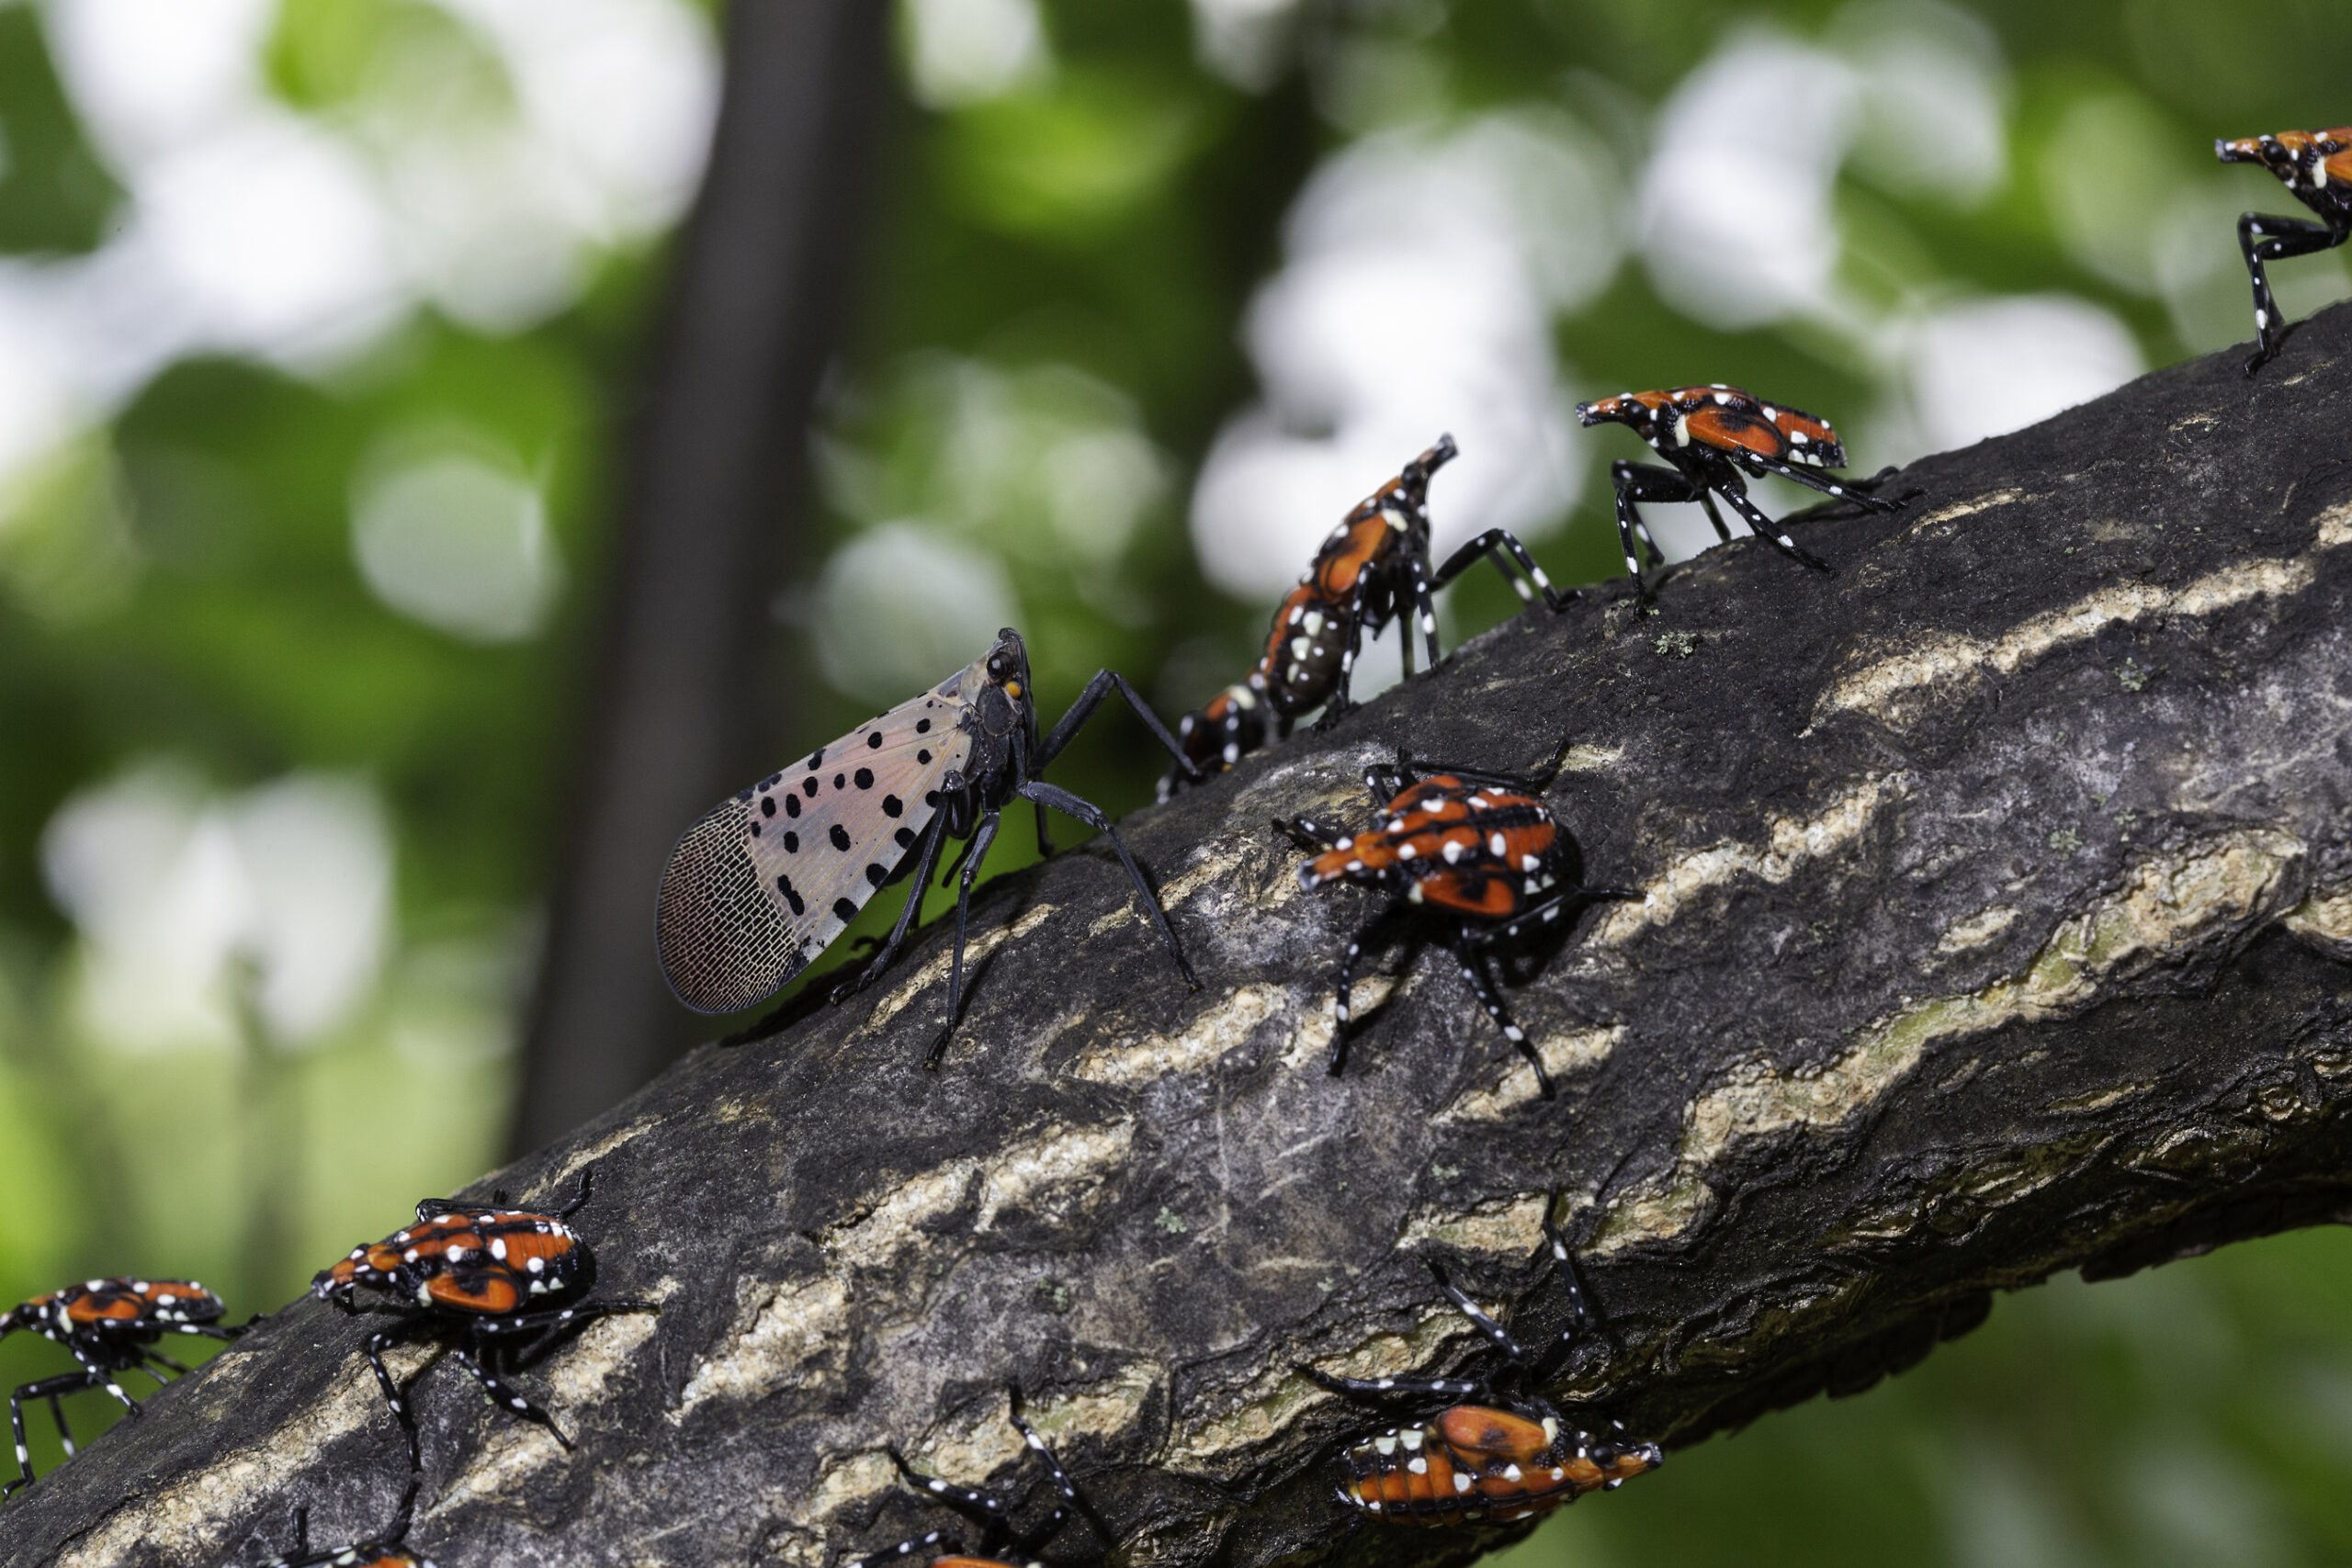 Stock photo of spotted lanternflies sitting on tree